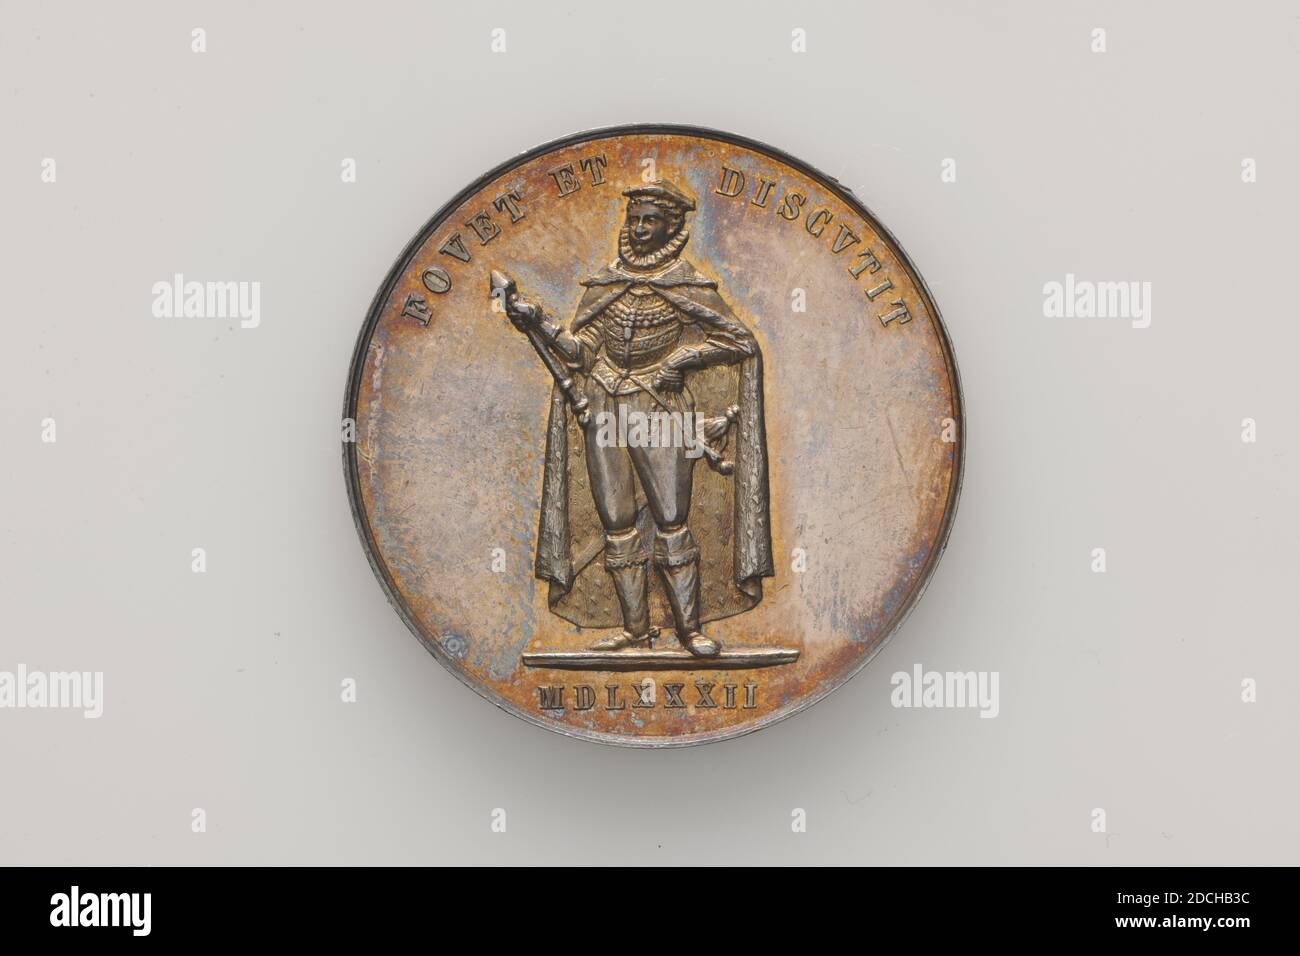 medal, Anonymous, 1860, minted, General: 3.1 x 0.3cm 31 x 3mm, Weight: 12.2g, Bronze medal on the masquerade at the anniversary of Leiden University in 1860. The subject of the masquerade was the entry and inauguration of Frans, Duke of Anjou, Alençon, Berry, etc. in 1682. On the front is depicted the Duke Frans van Anjou, wearing a beret and a wide cloak on his head . Above the performance the caption: FOVET ET DISCVTIT, and below MDLXXXII. On the back the inscription: IN MEMORIAM FESTI DIEI NATALIS CCLXXXV ACAD.LVGD.BAT.XI IVN.A.MDCCCLX, and an asterisk, man's portrait Stock Photo